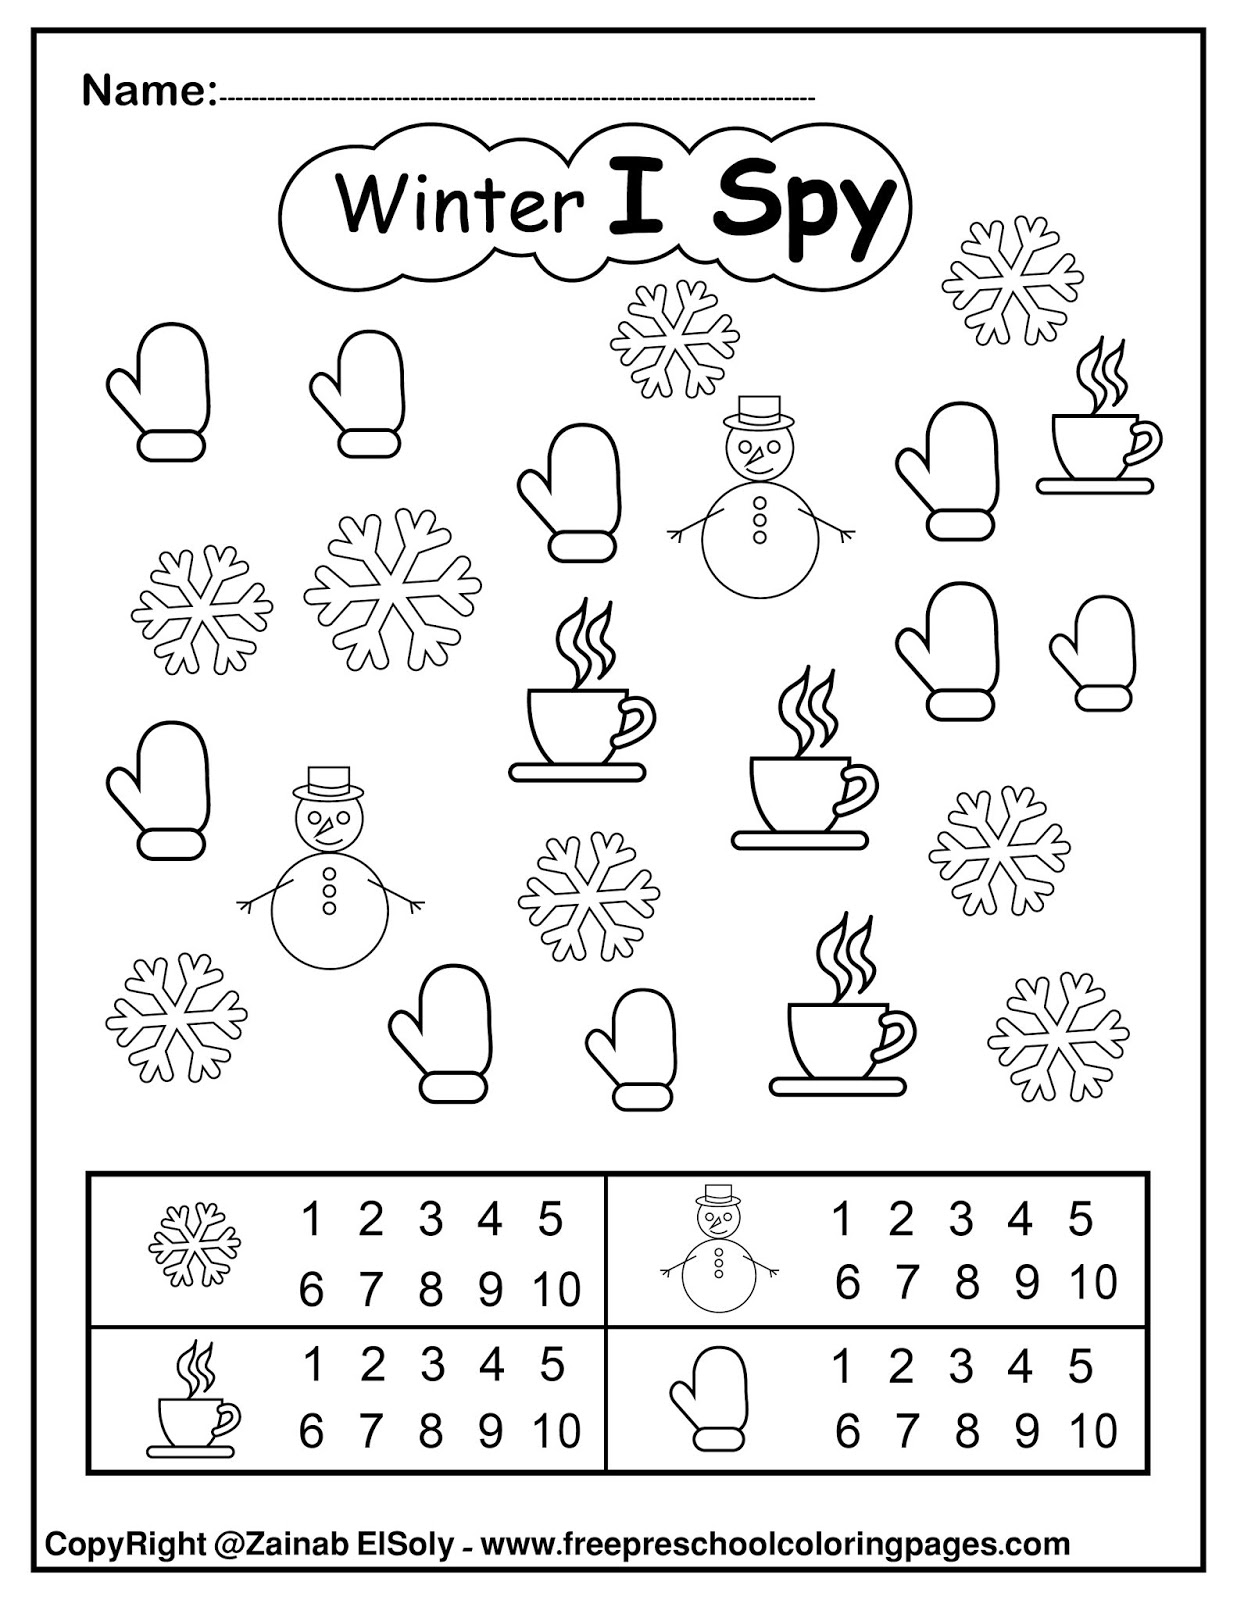 set of Winter "I Spy" coloring pages game - easy level